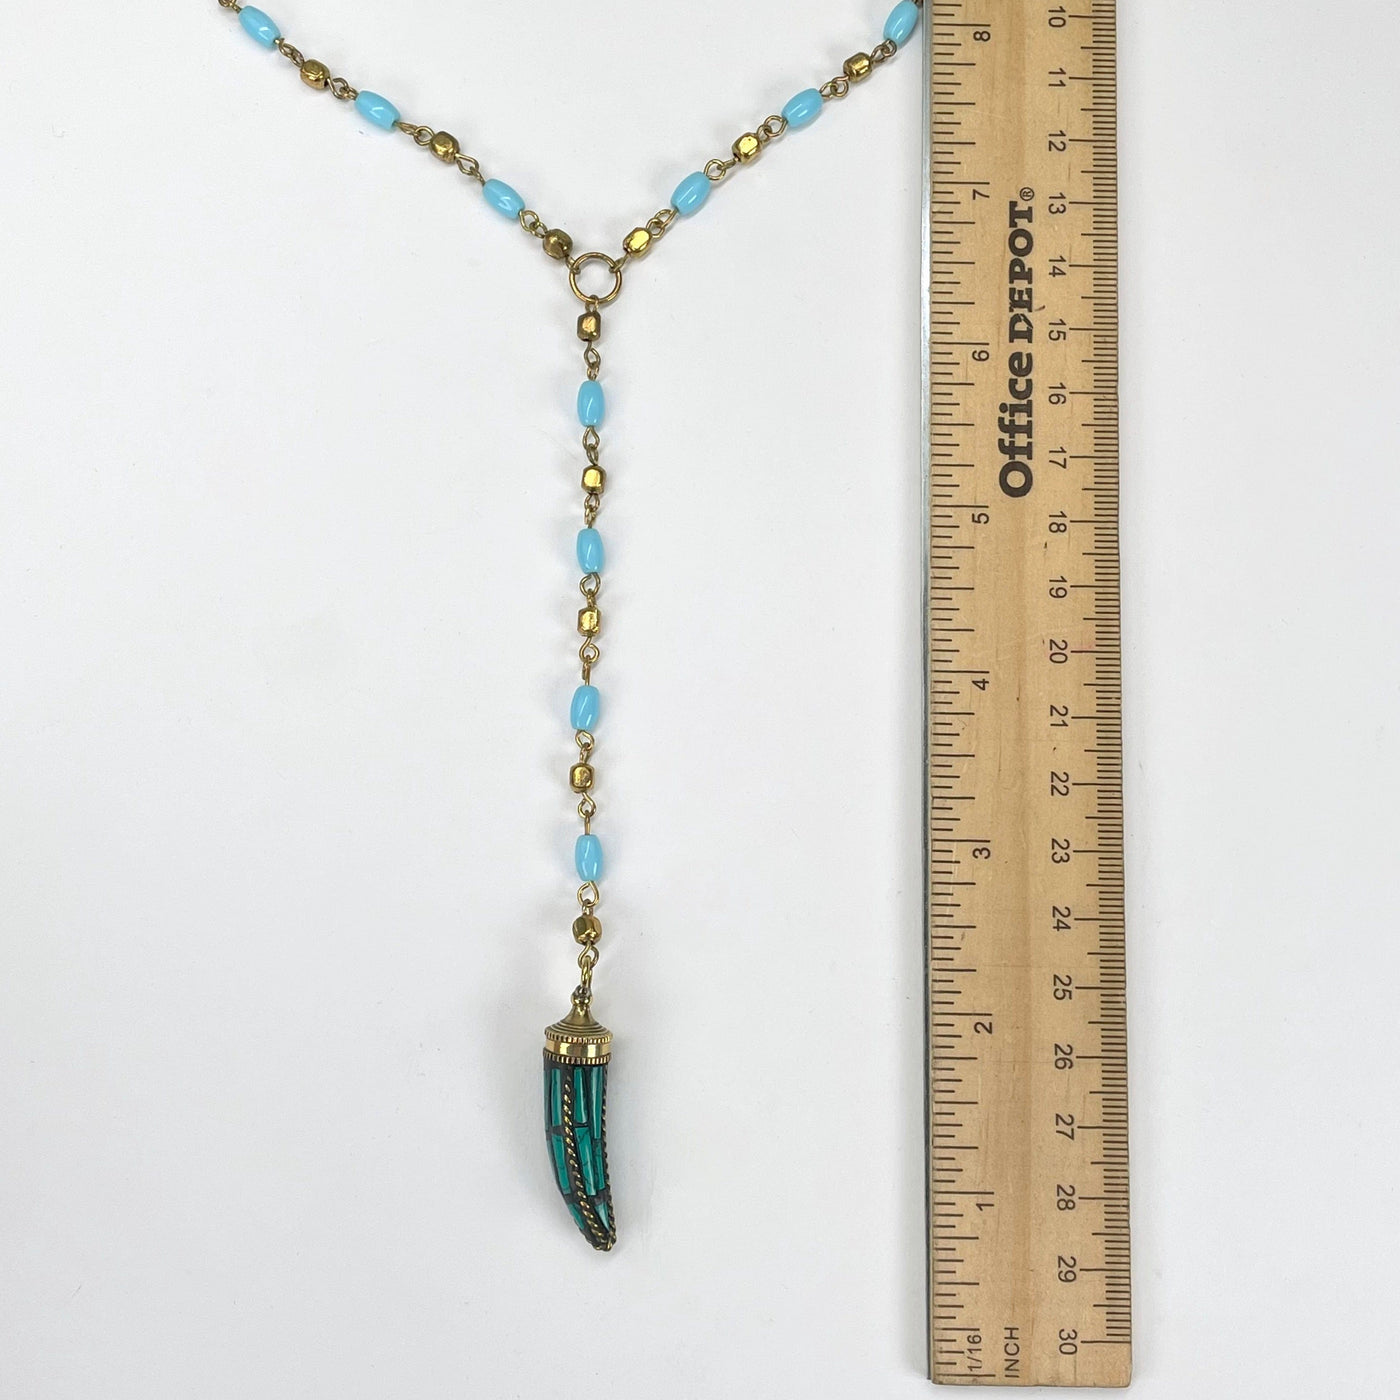 pendant chain and pendant with ruler for size reference